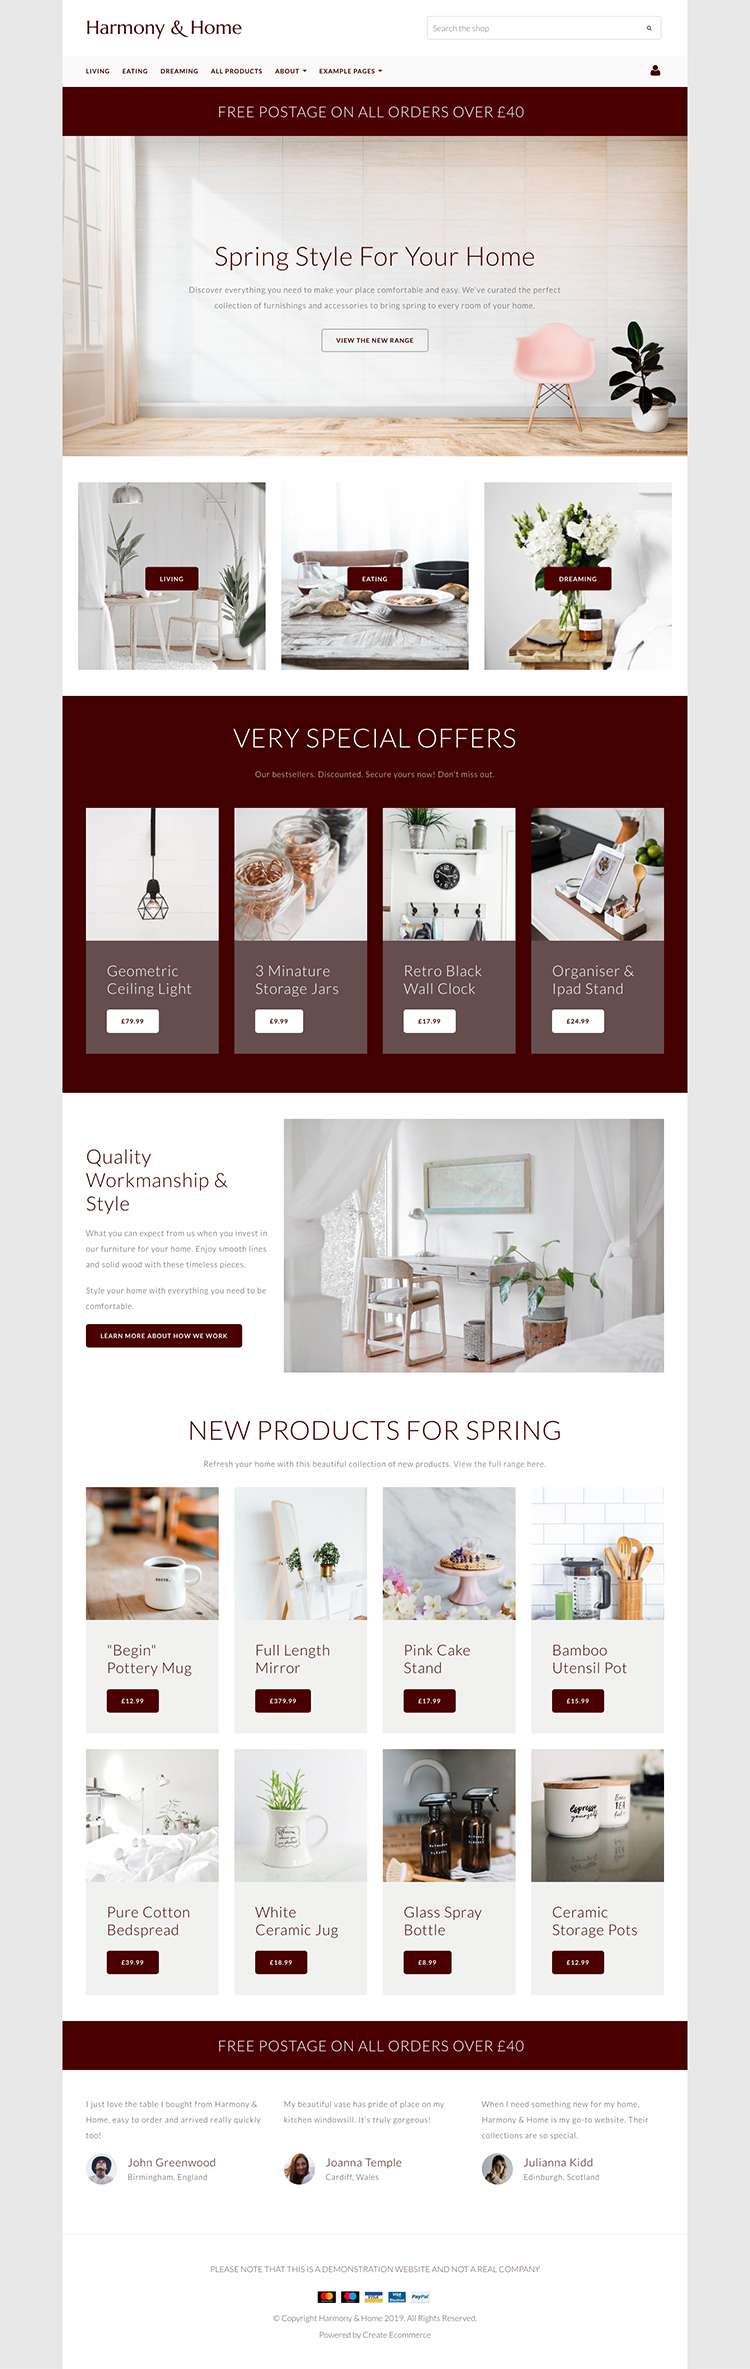 Harmony & Home Spring Home Page Example